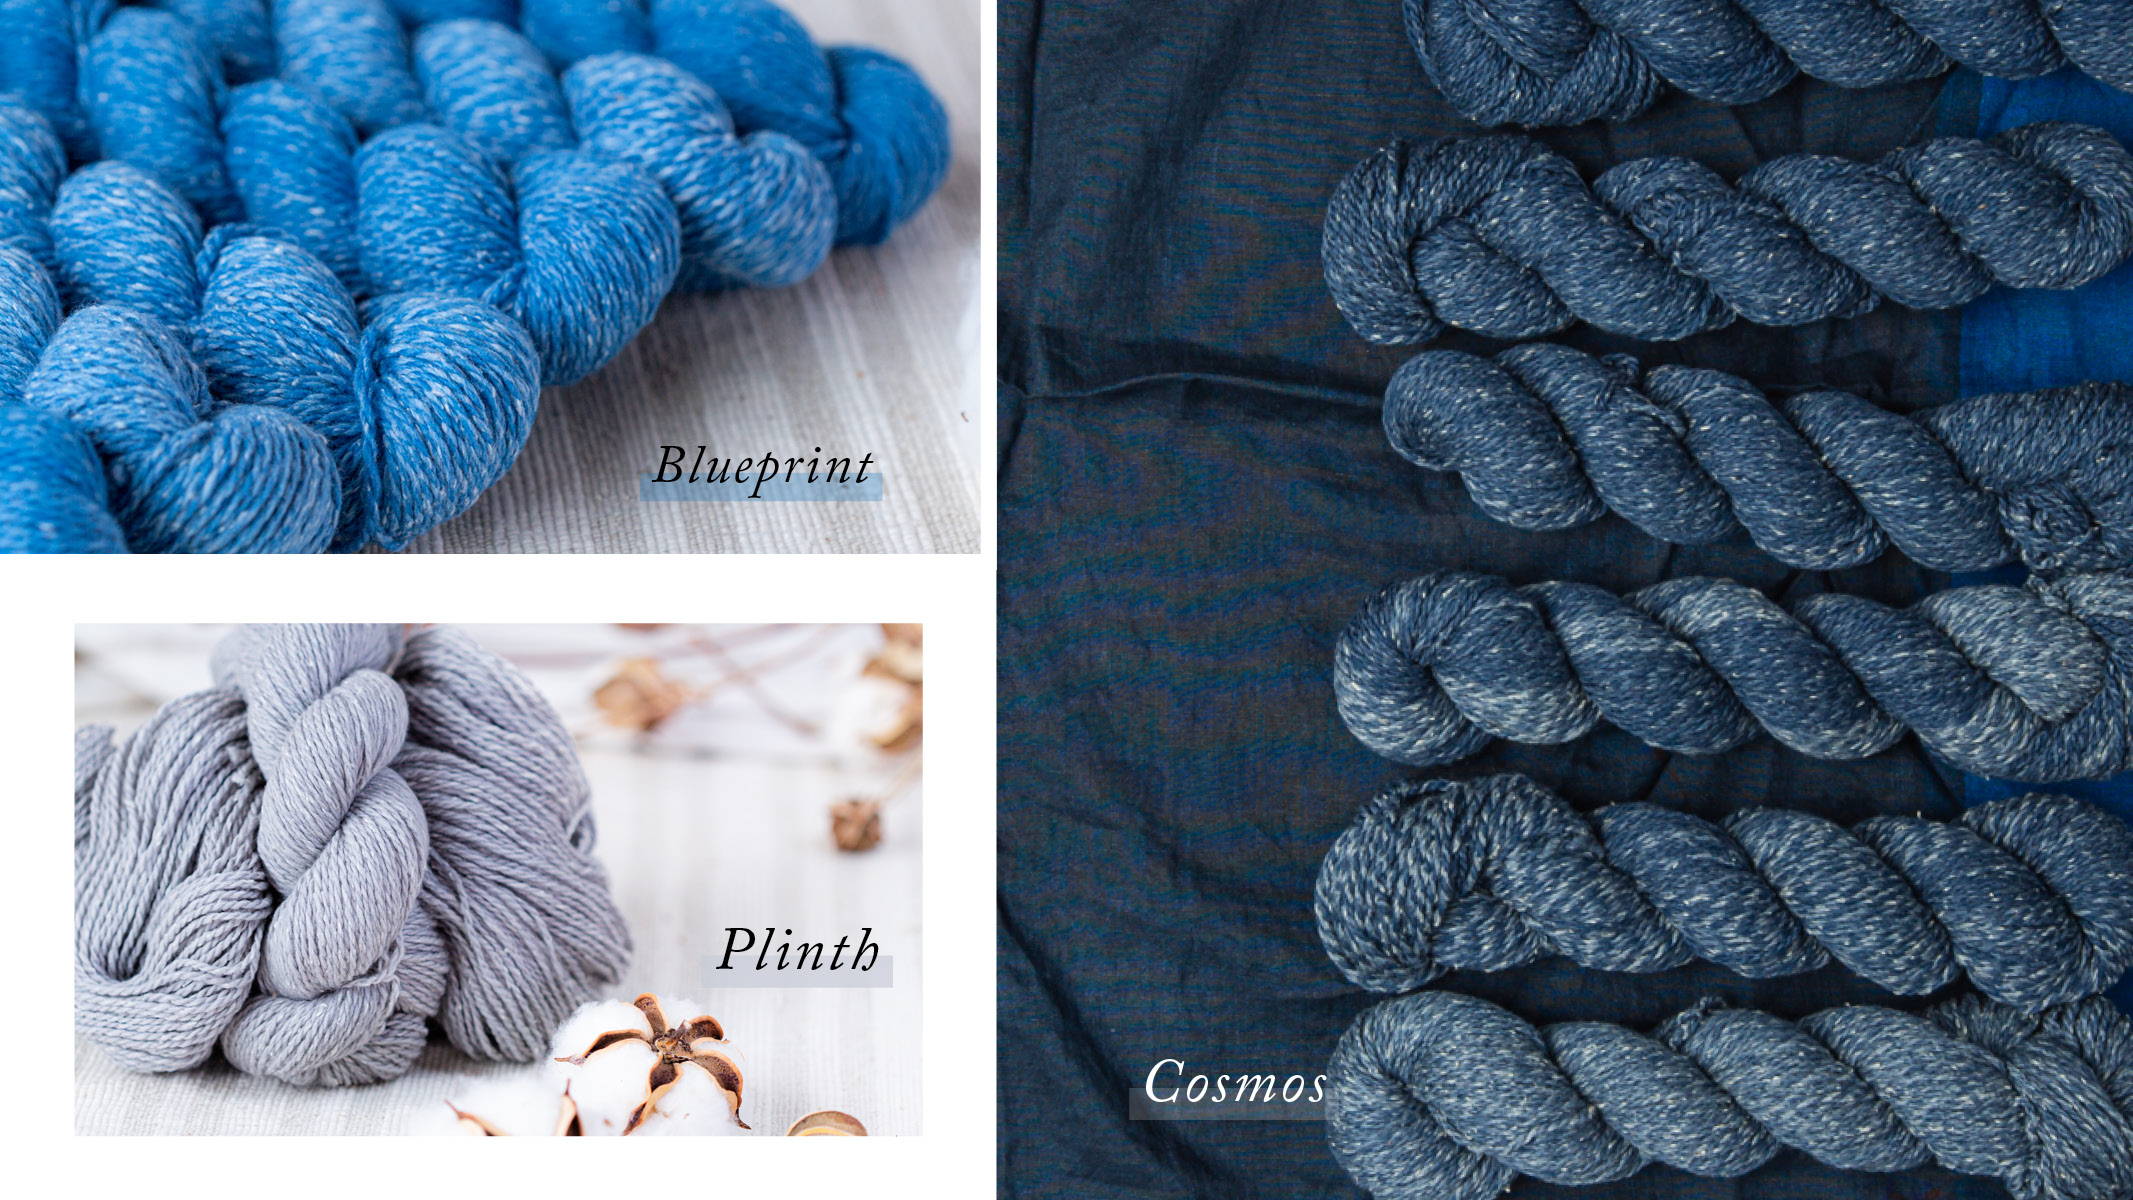 Right: a neat row of Dapple Cosmos in varying tones on a dark blue fabric. Upper left: a row of Dapple Blueprint skeins cropped at an angle. Lower Left: a skein of Dapple Plinth on a yarn swirl of the same colorway with cotton flowers in the foreground and background.